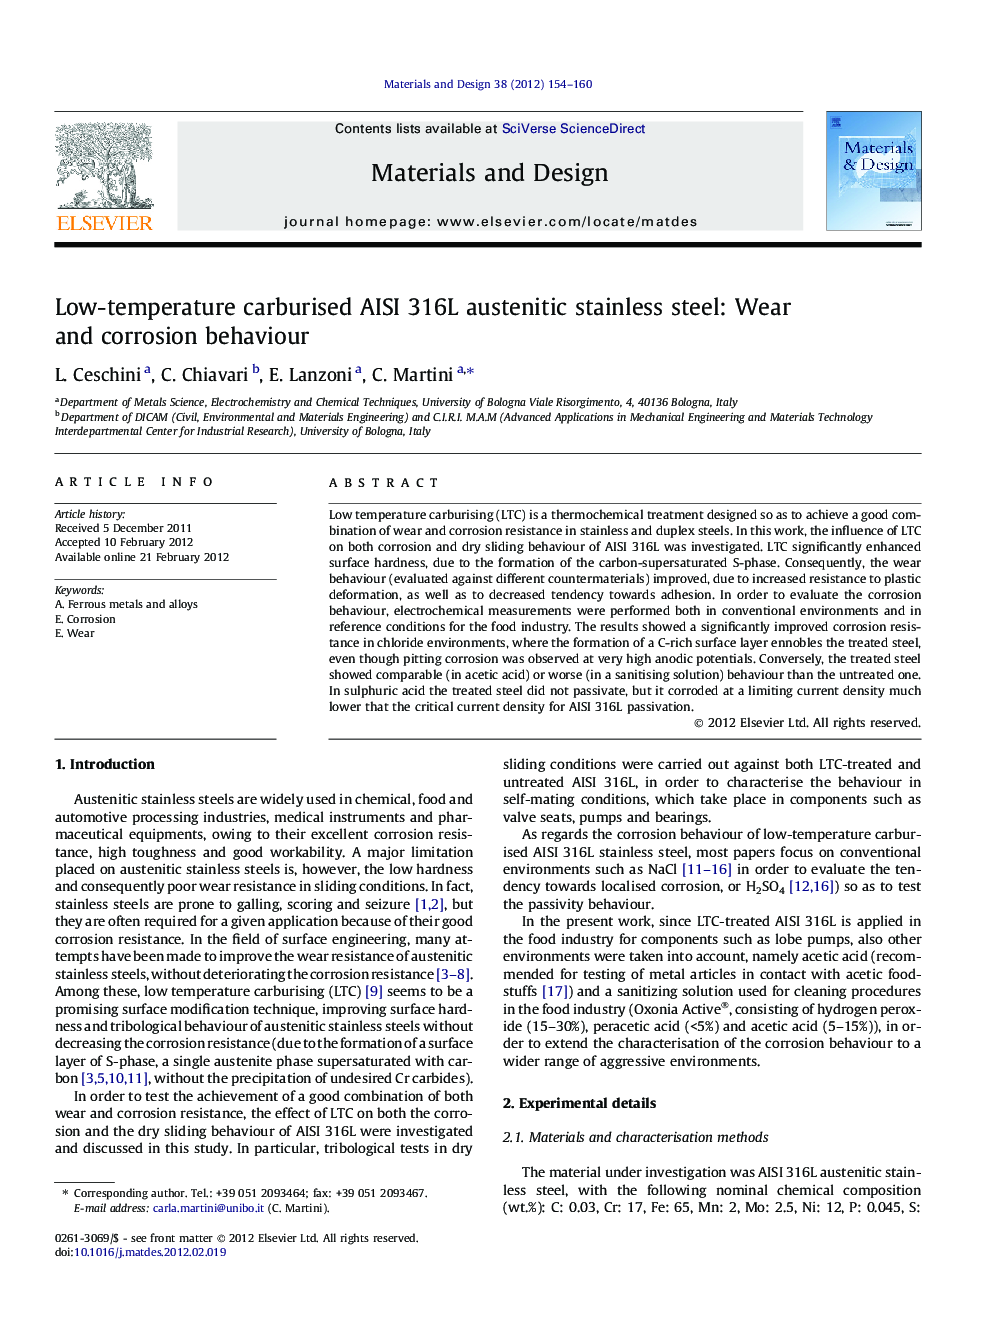 Low-temperature carburised AISI 316L austenitic stainless steel: Wear and corrosion behaviour